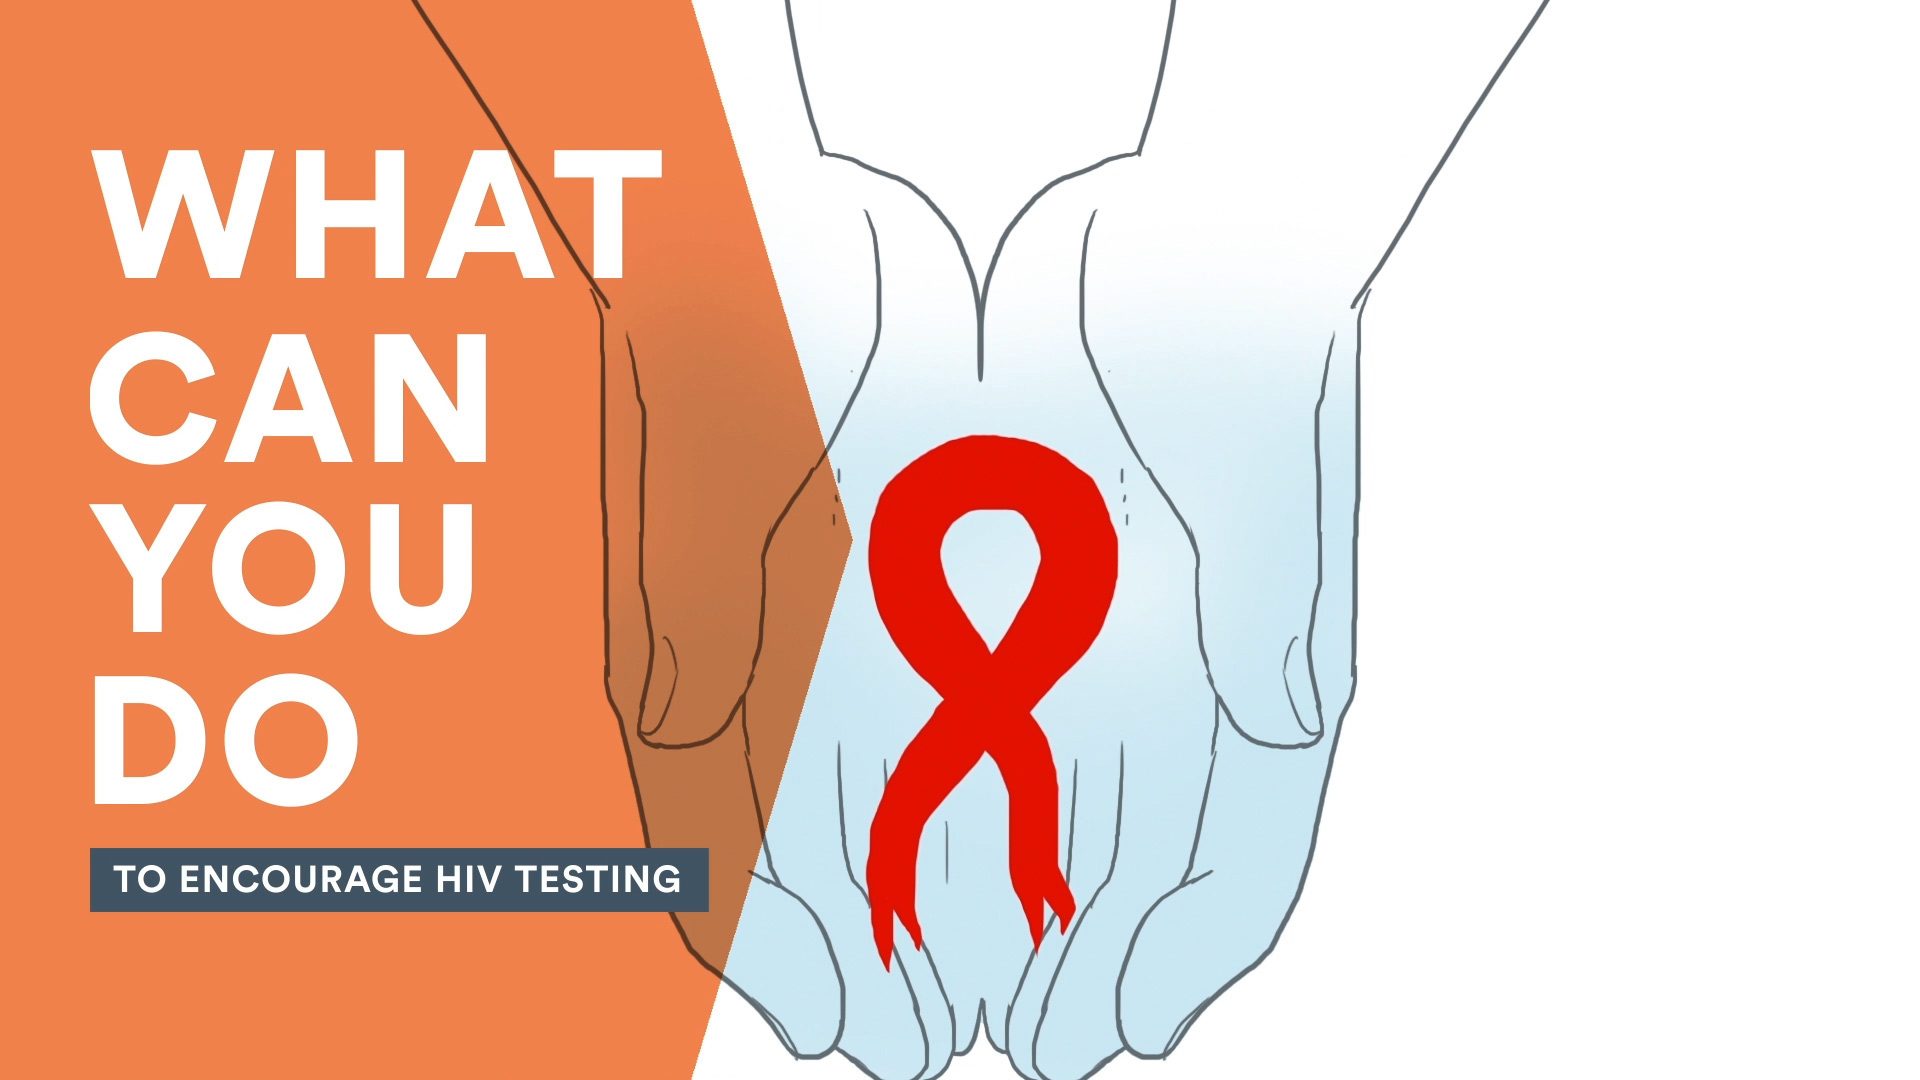 WATCH: What can you do to encourage HIV testing?